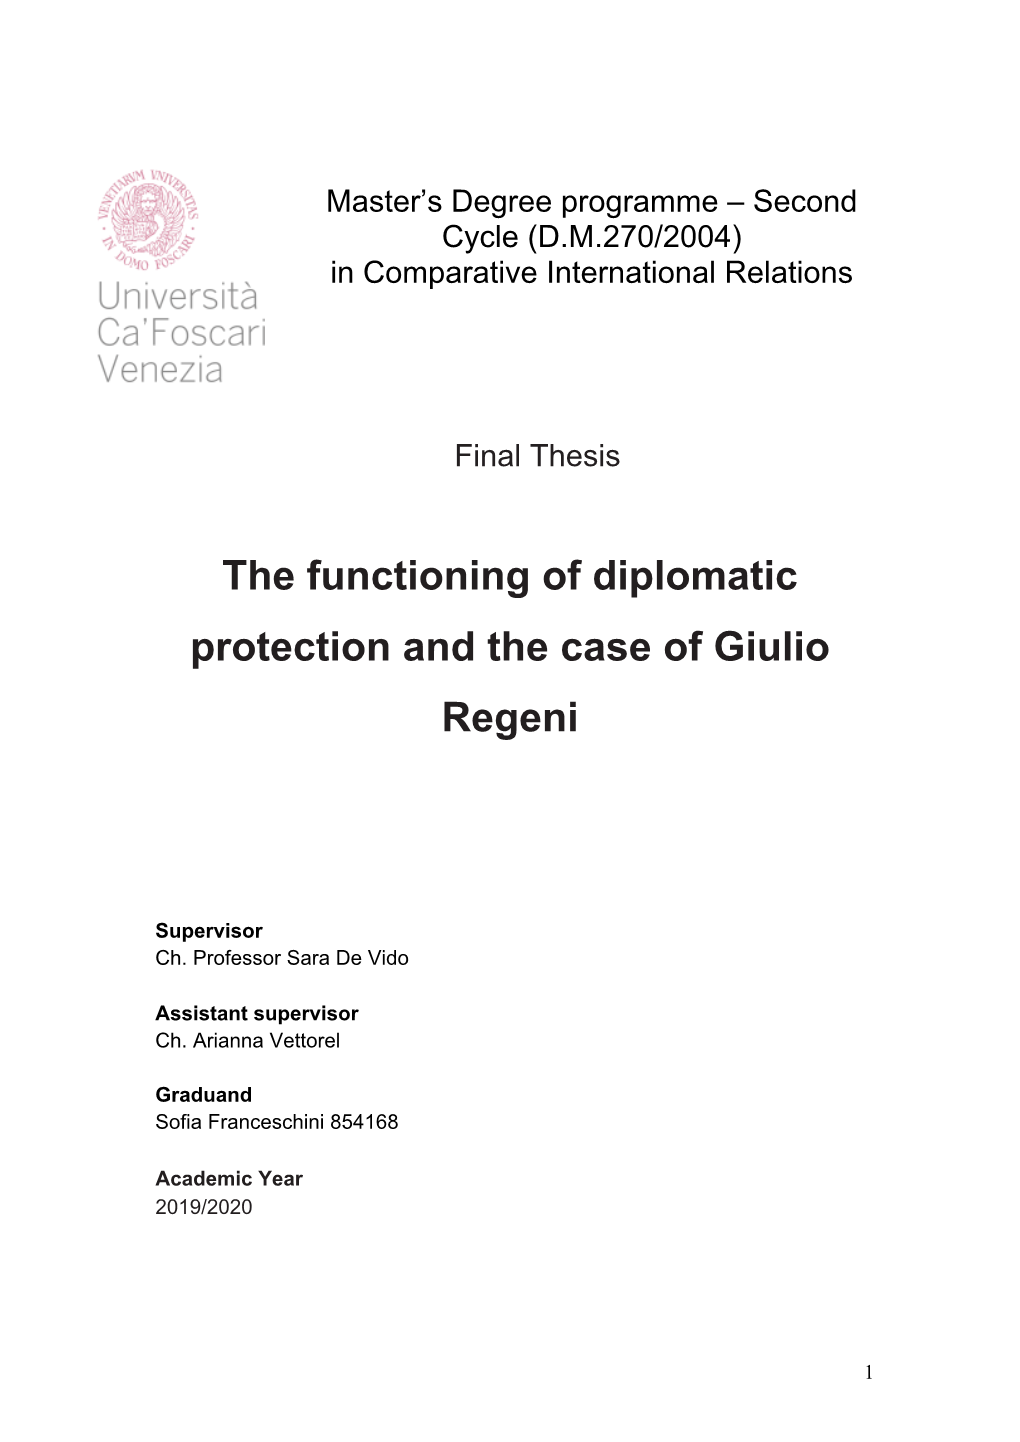 The Functioning of Diplomatic Protection and the Case of Giulio Regeni